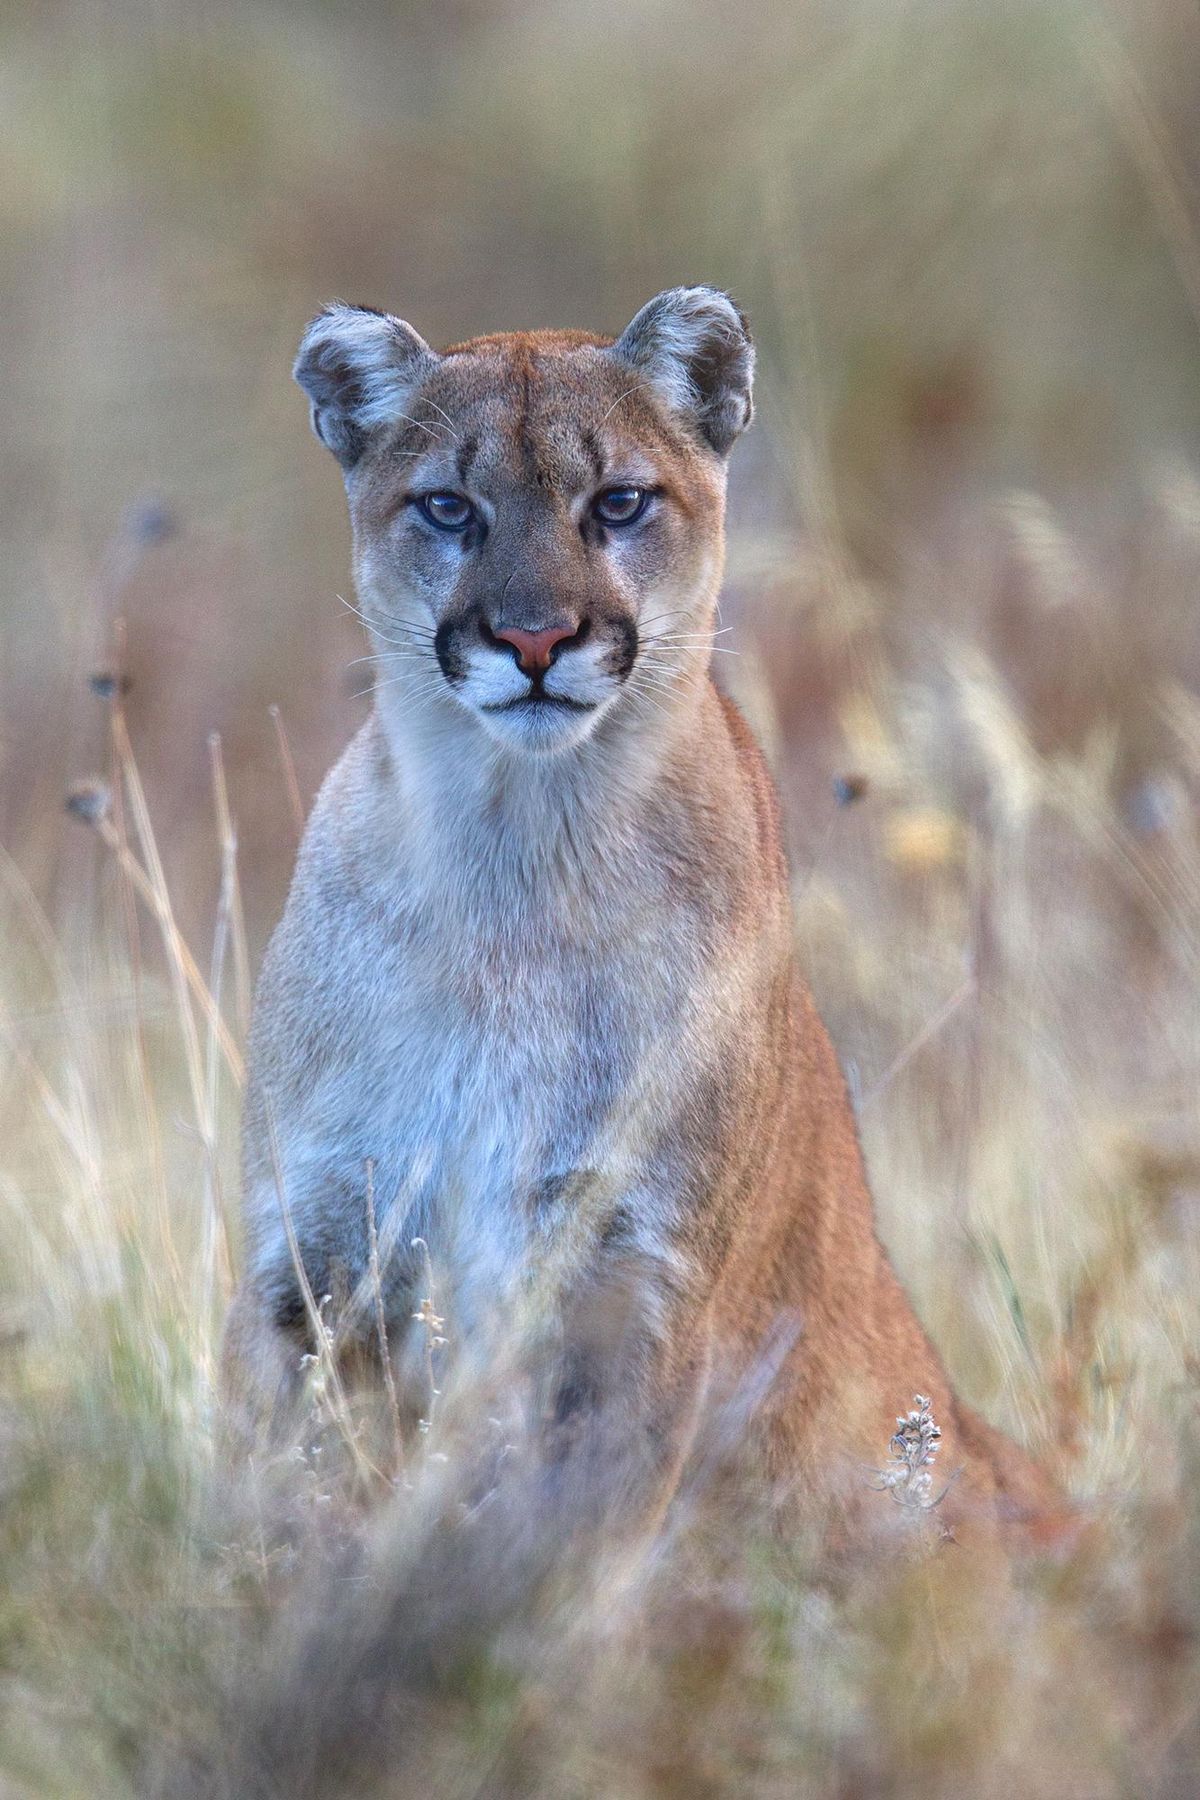 In a photo titled "A Moment," a mountain lion pauses briefly for the camera of Montana wildlife photographer Donald M. Jones. (Photo by Donald M. Jones)